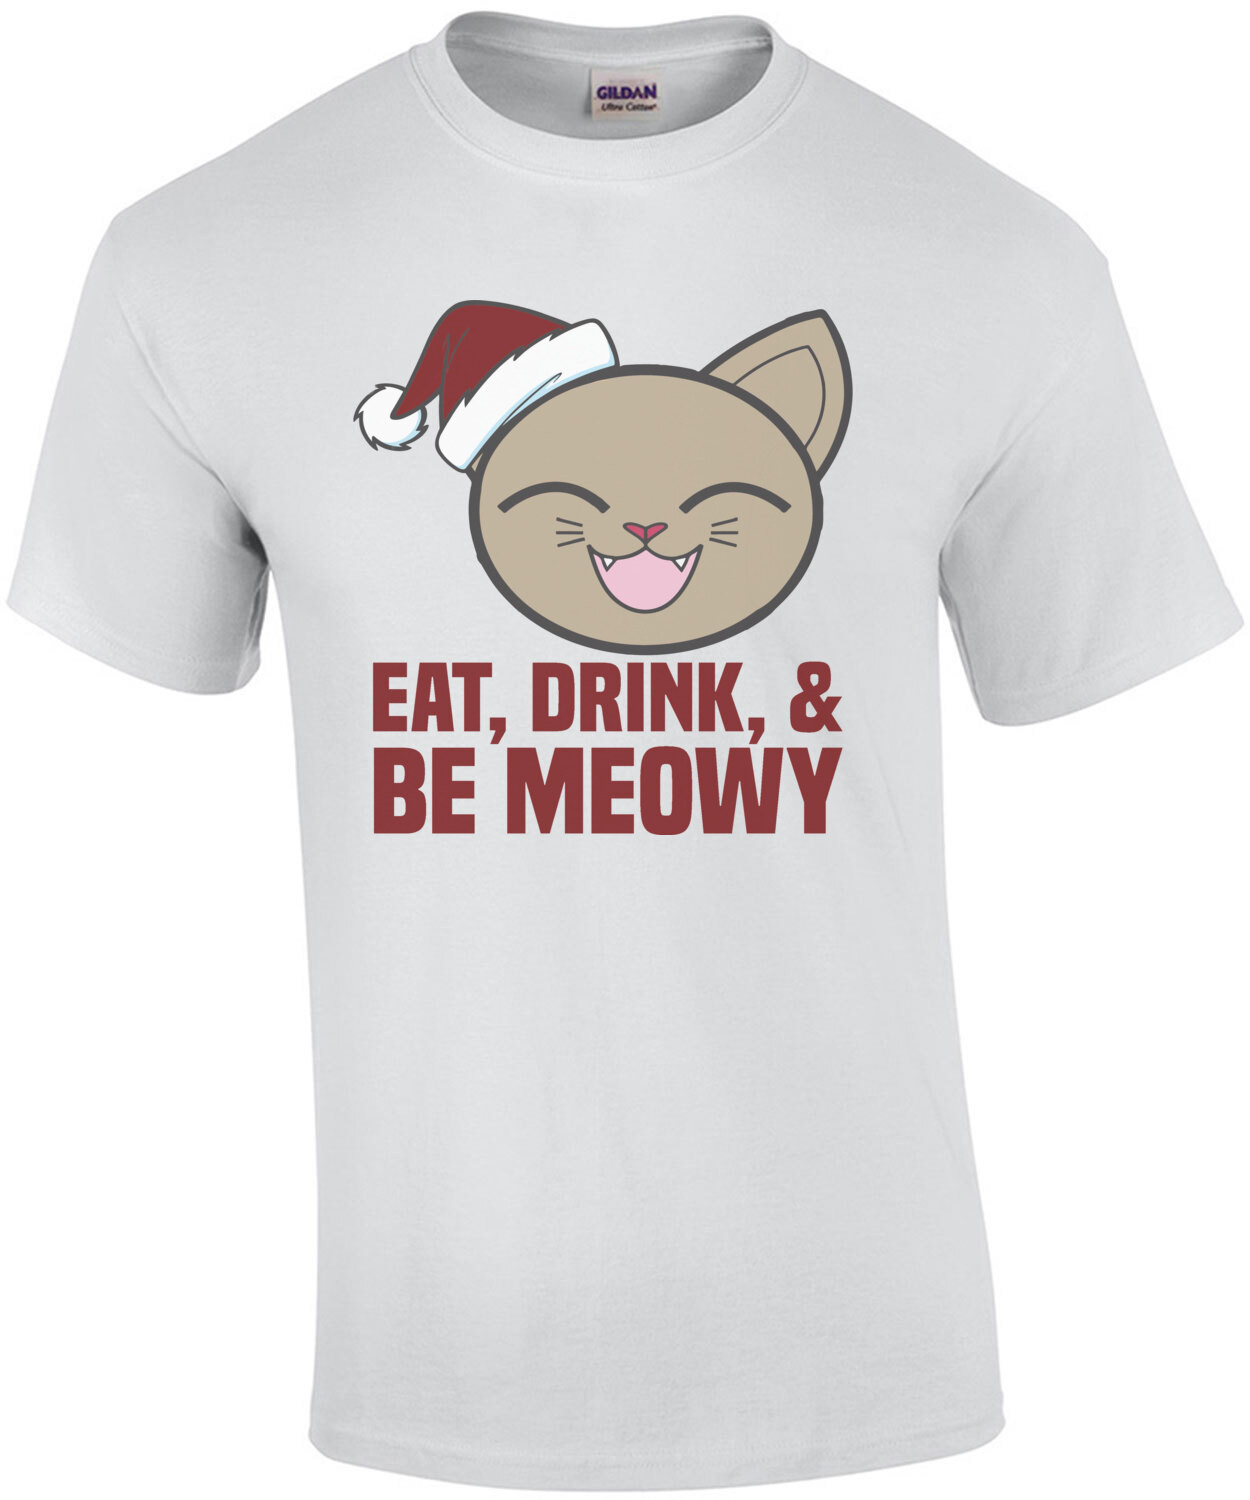 Eat, Drink, and be meowy - funny cat christmas t-shirt